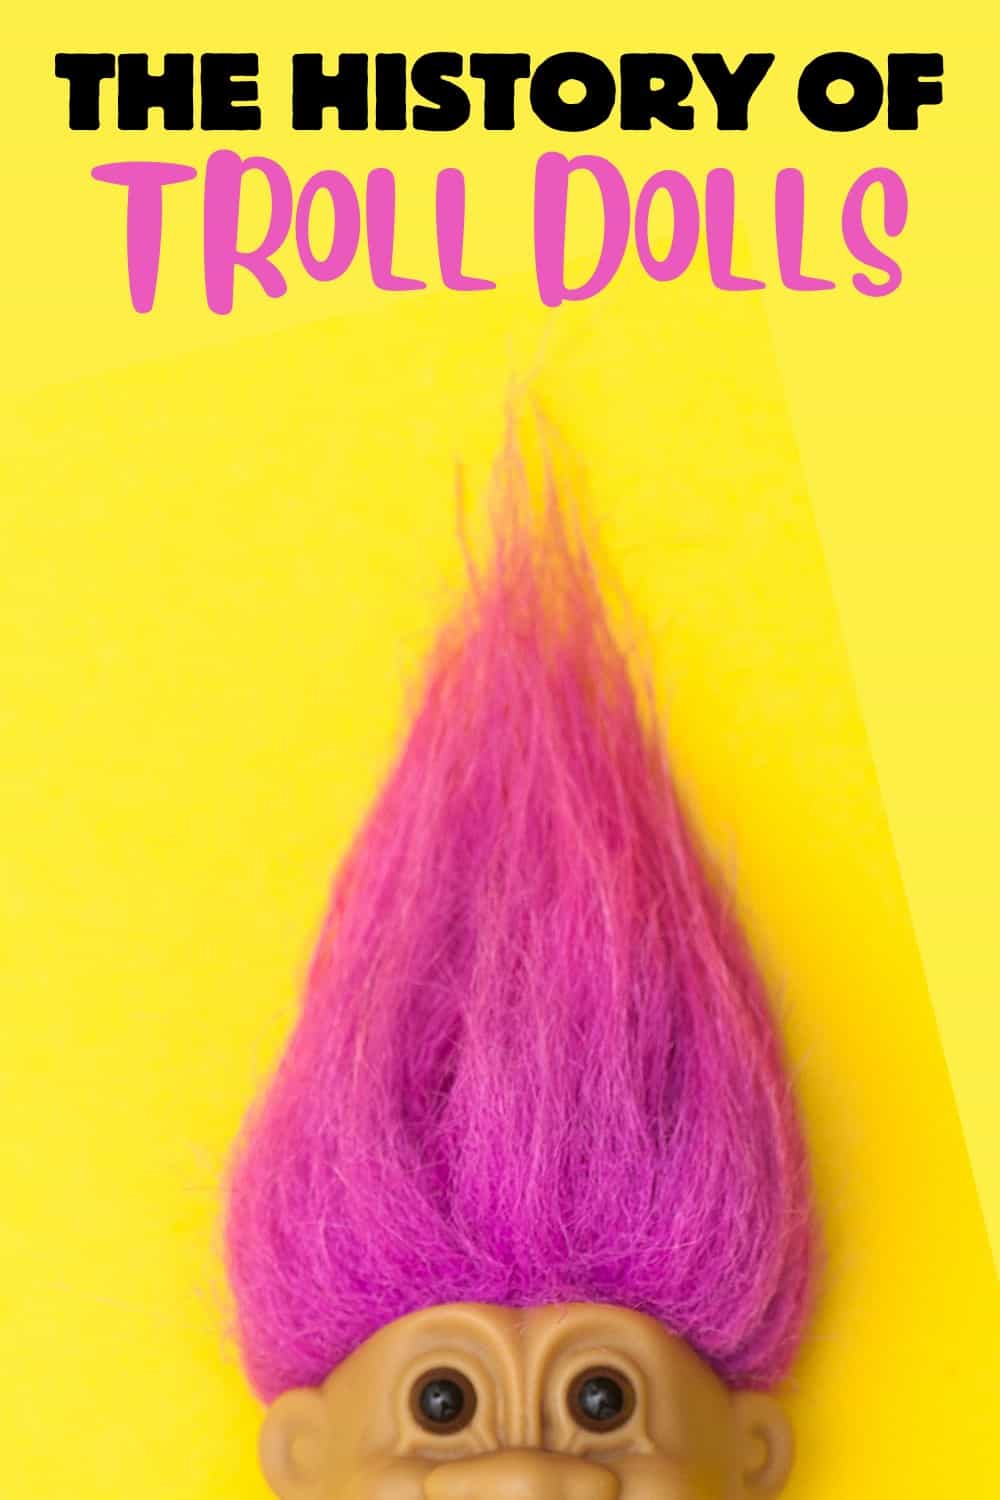 The first Thomas Dam Troll Doll was created in 1959